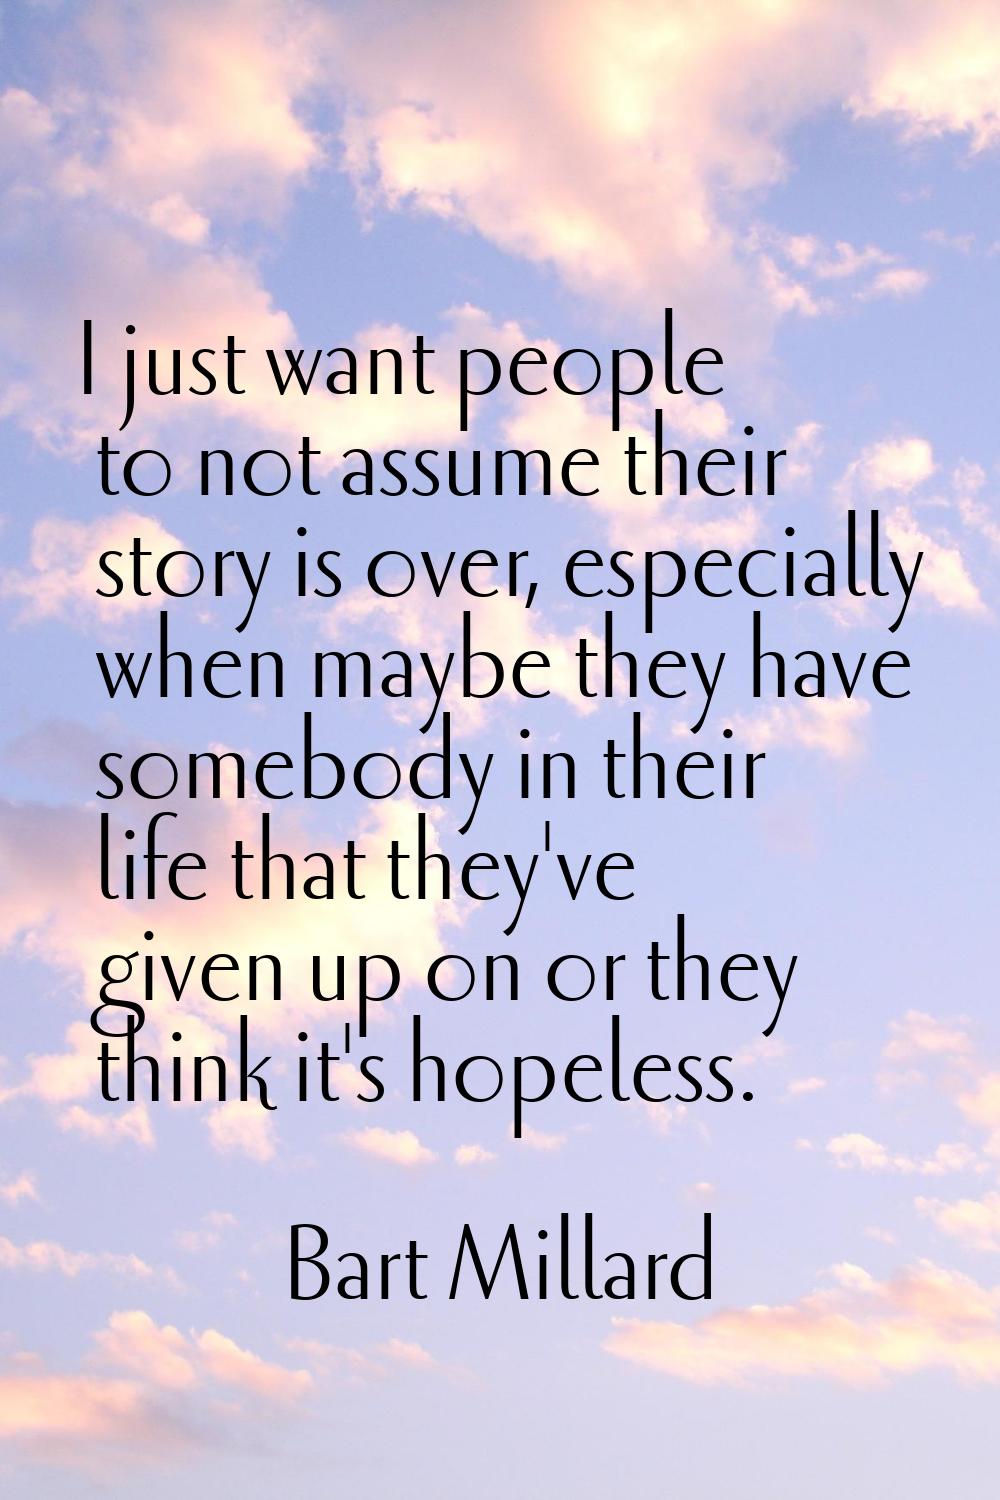 I just want people to not assume their story is over, especially when maybe they have somebody in t